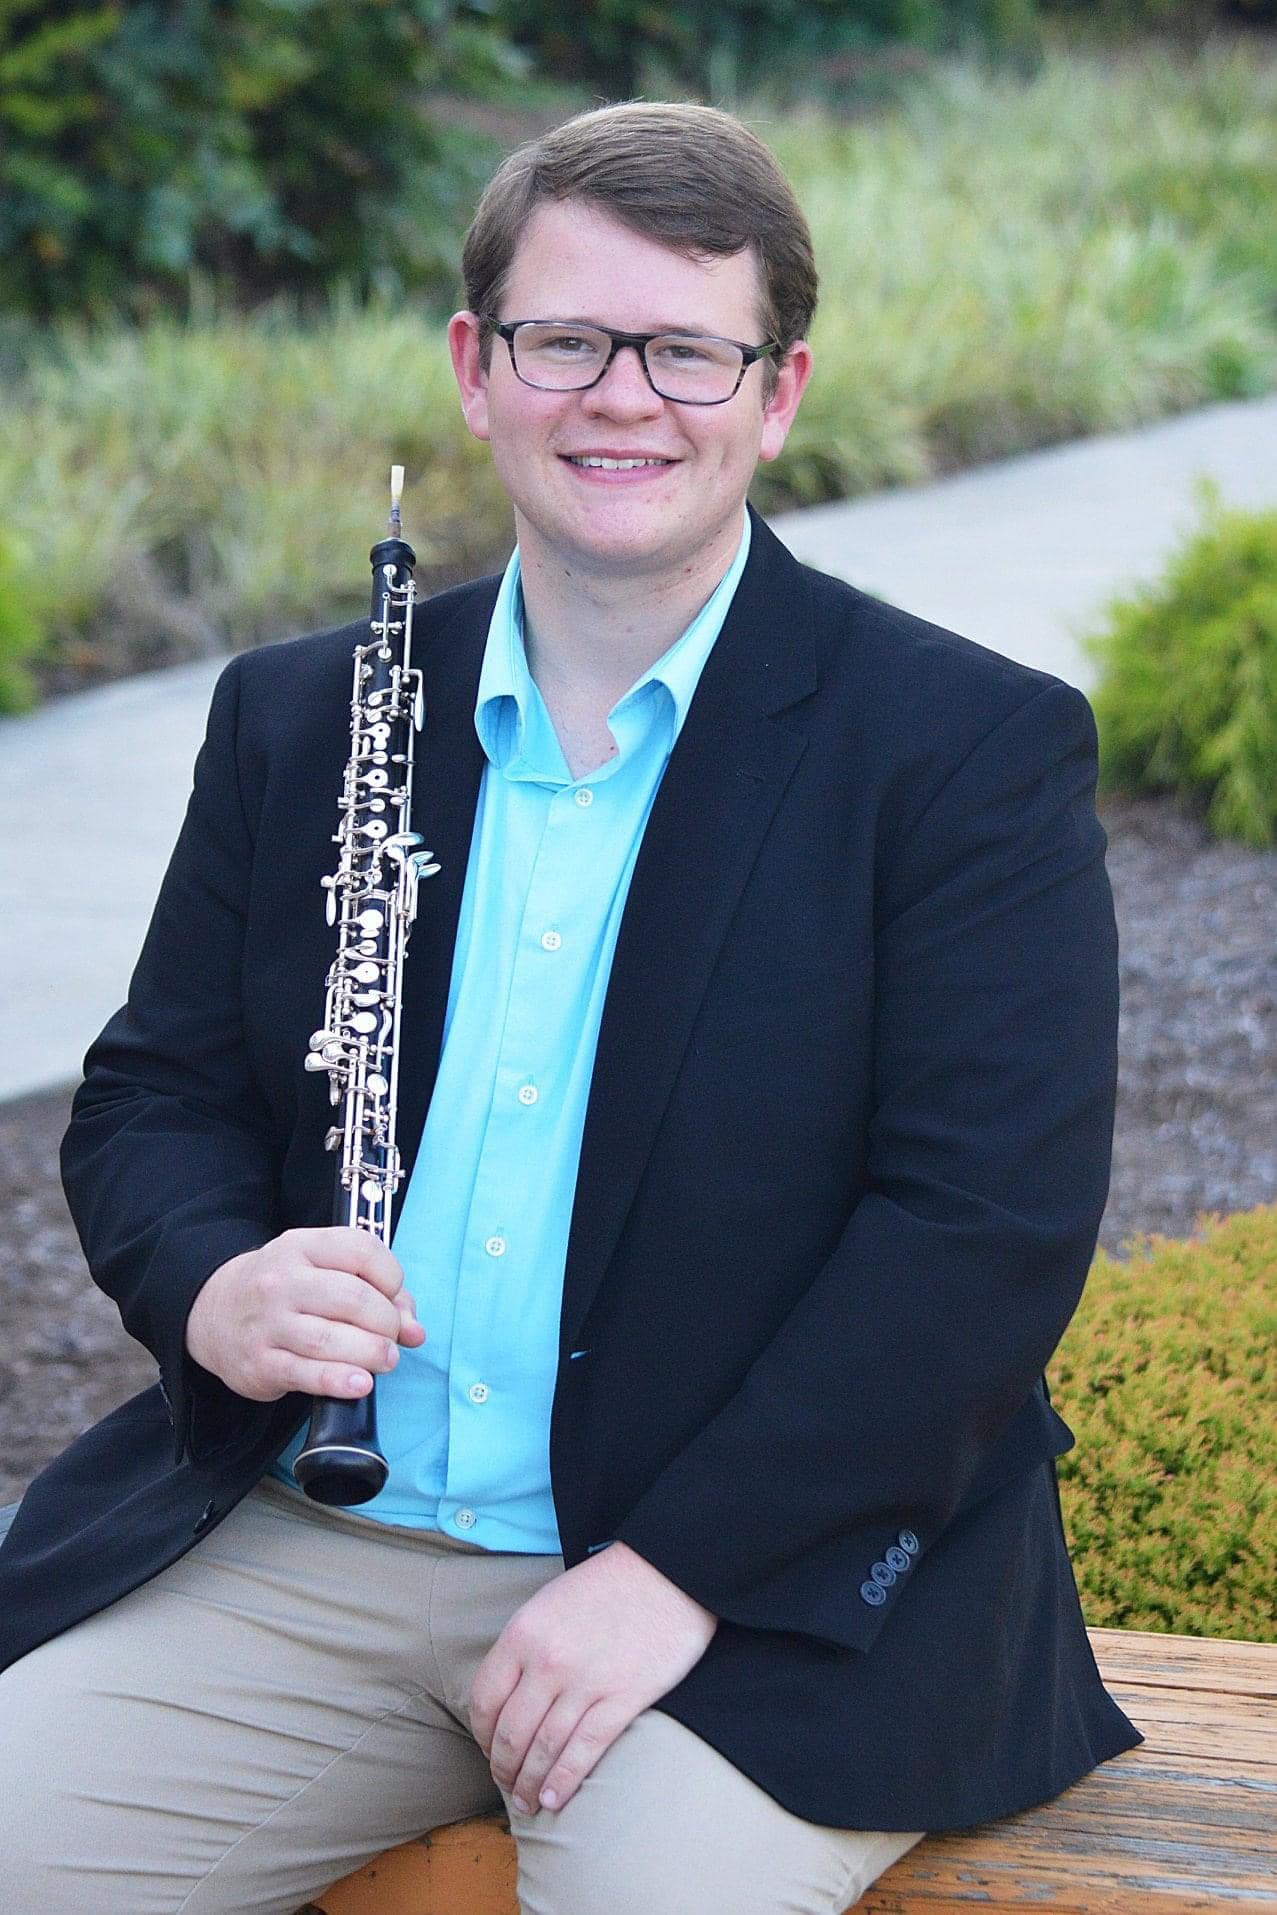 Hunter Collins sits holding an oboe.